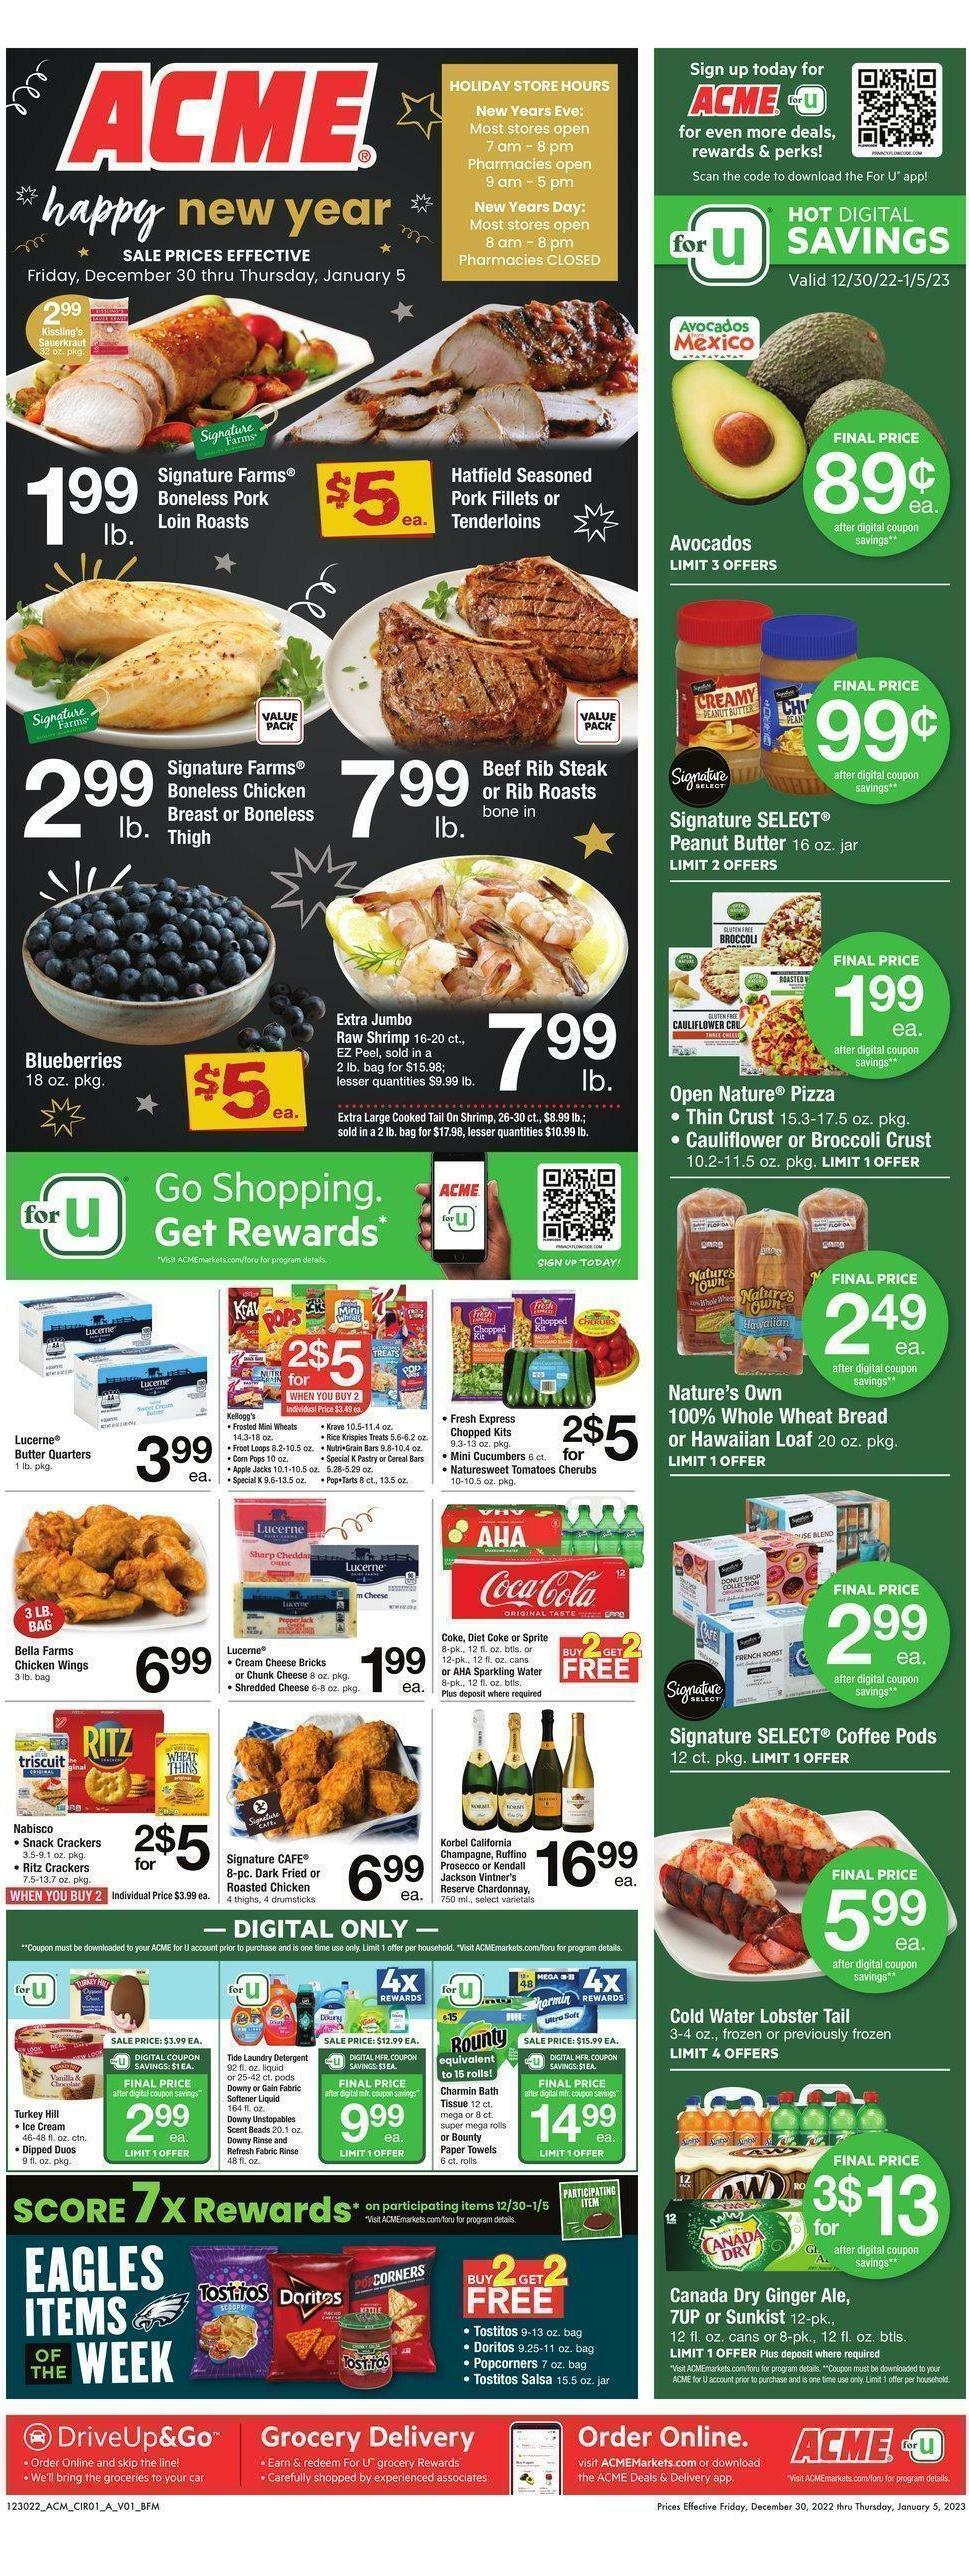 ACME Markets Weekly Ad from December 30